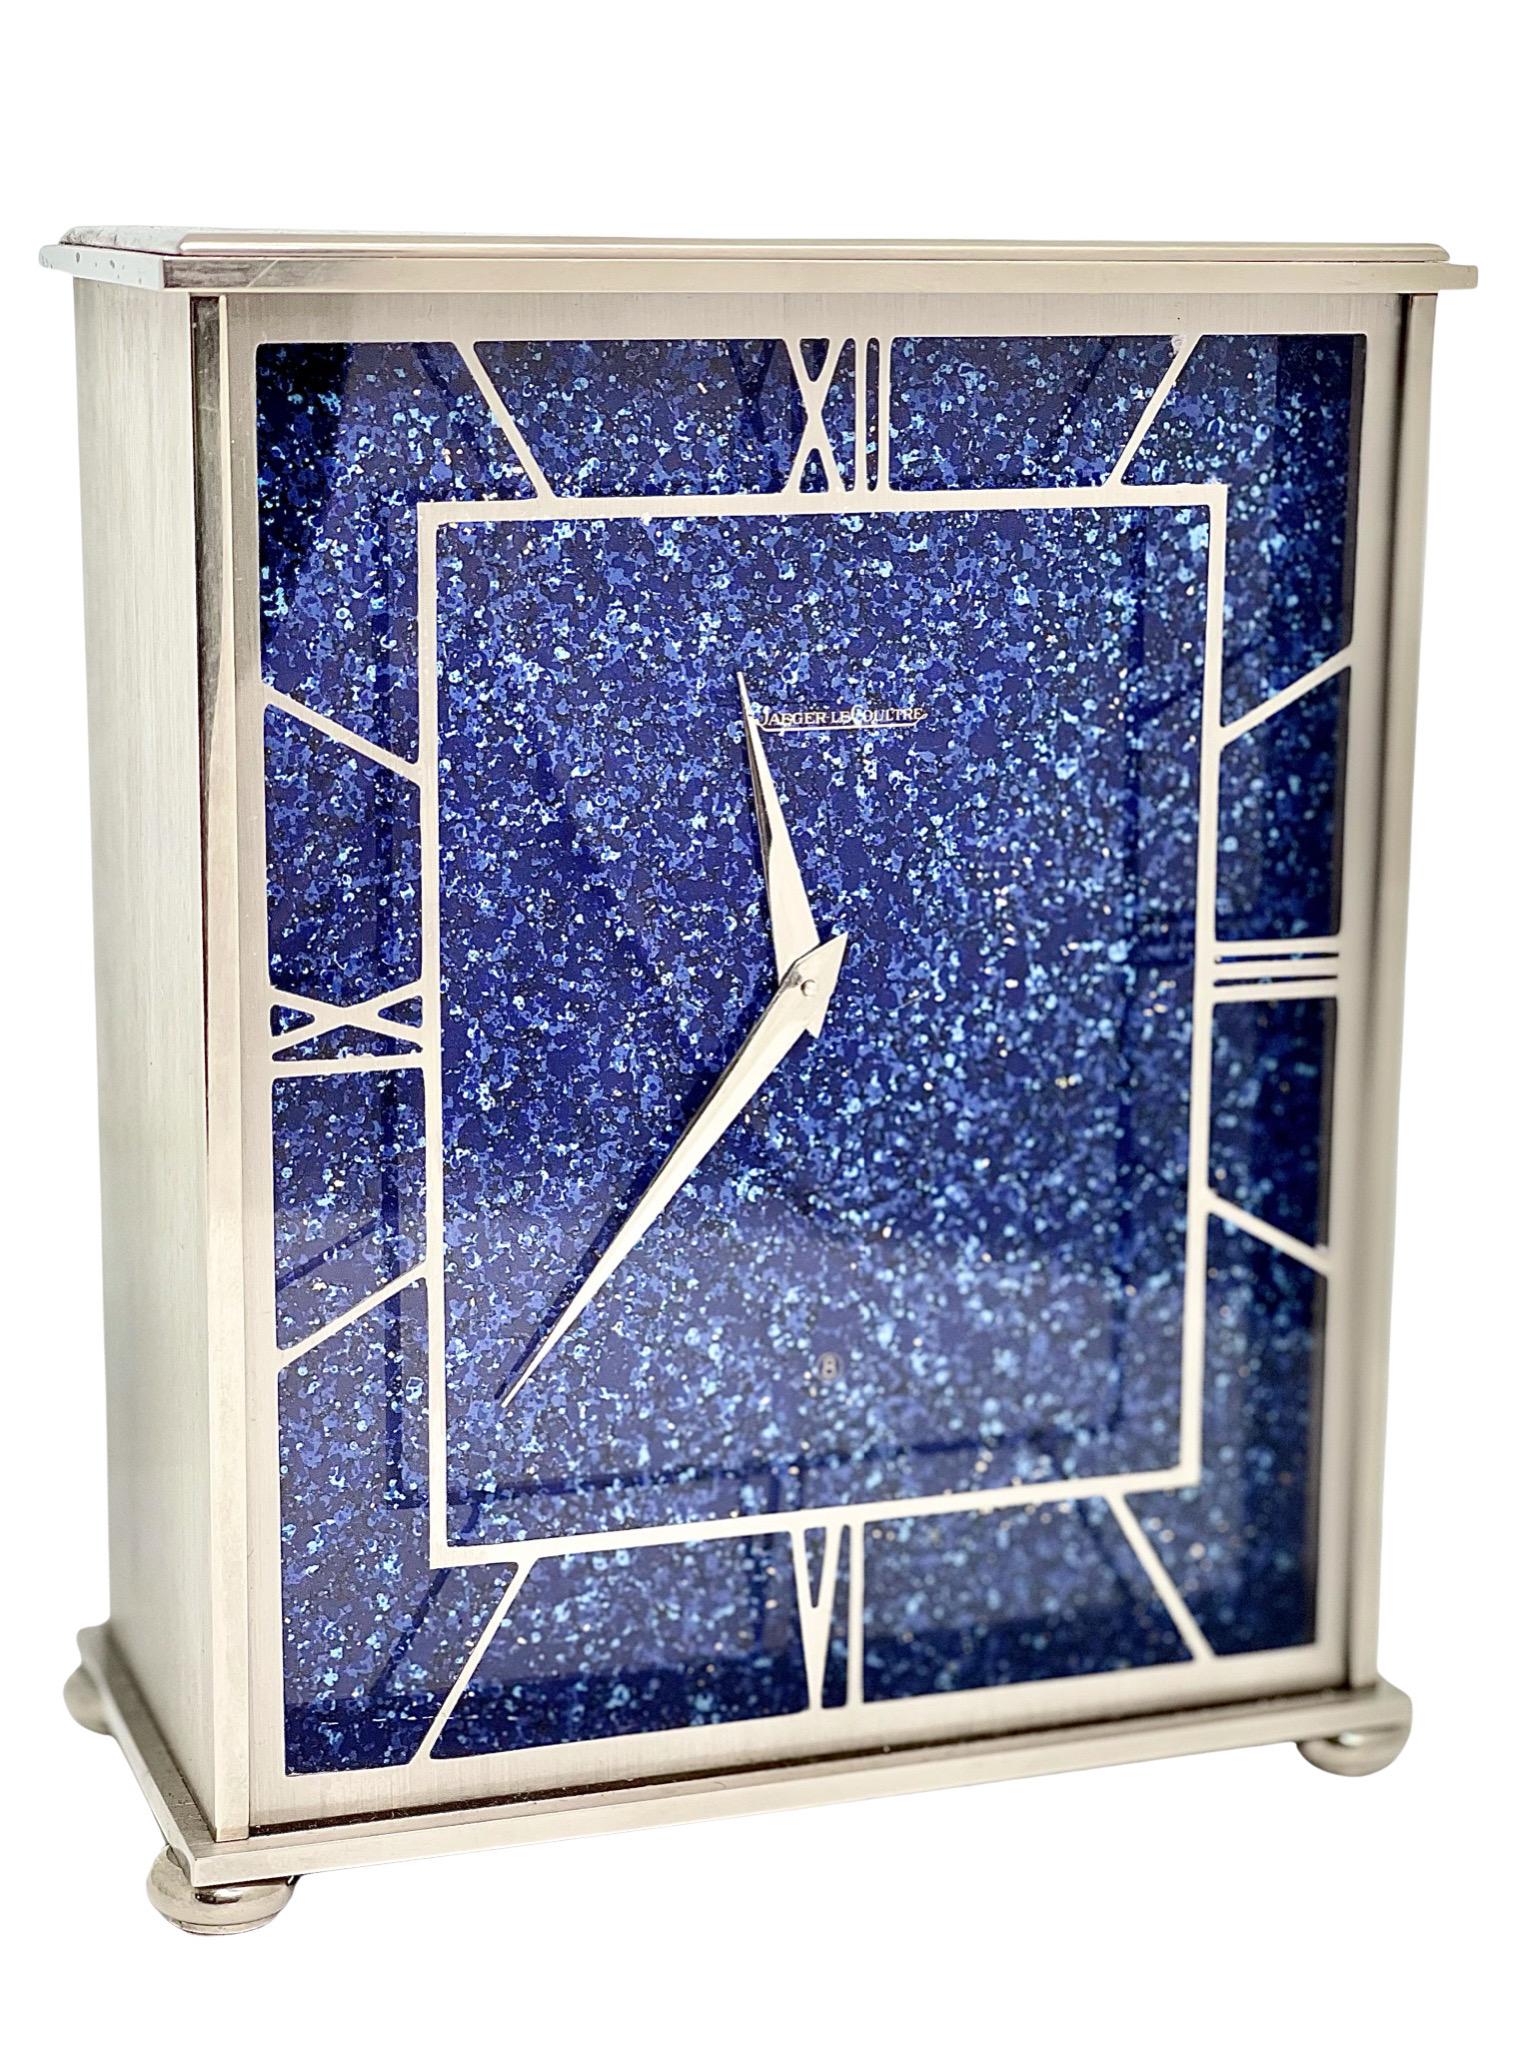 A beautiful mid-century rhodium-plated Lapis Lazuli effect eight day timepiece mantel clock made by Jaeger LeCoultre, La Chaux-de-Fons, Switzerland.

Mid-century clocks make stunning statements in your home. They blend extremely well with any